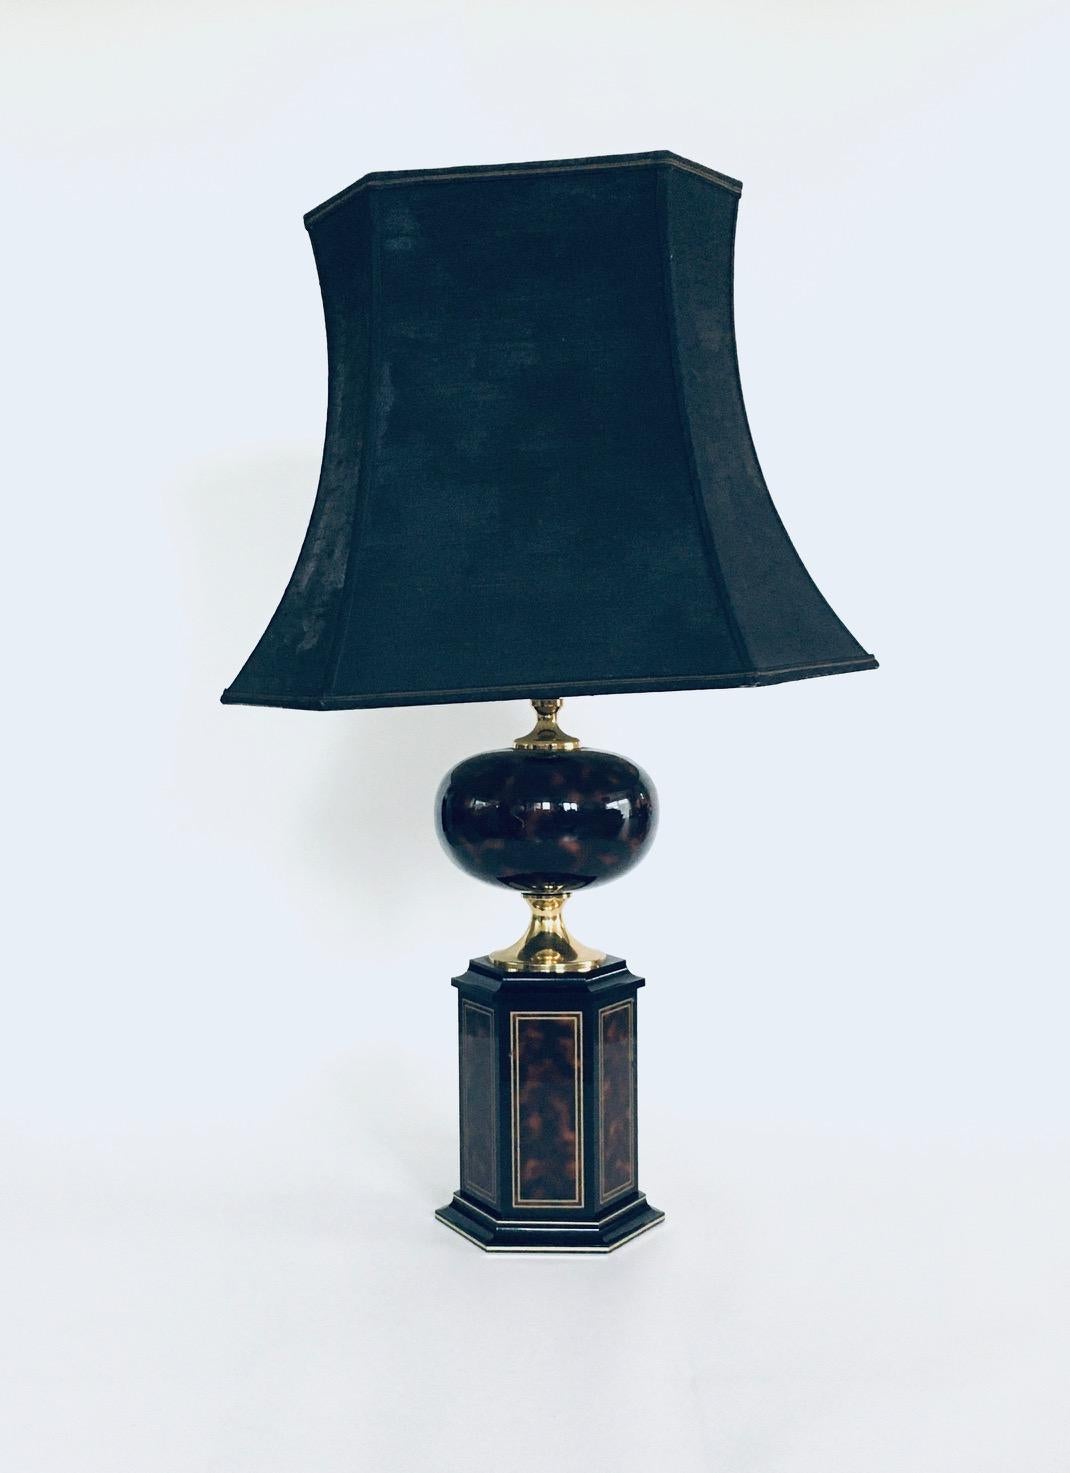 Vintage Hollywood Regency Style Design XL Table Lamp by Le Dauphin. Model 